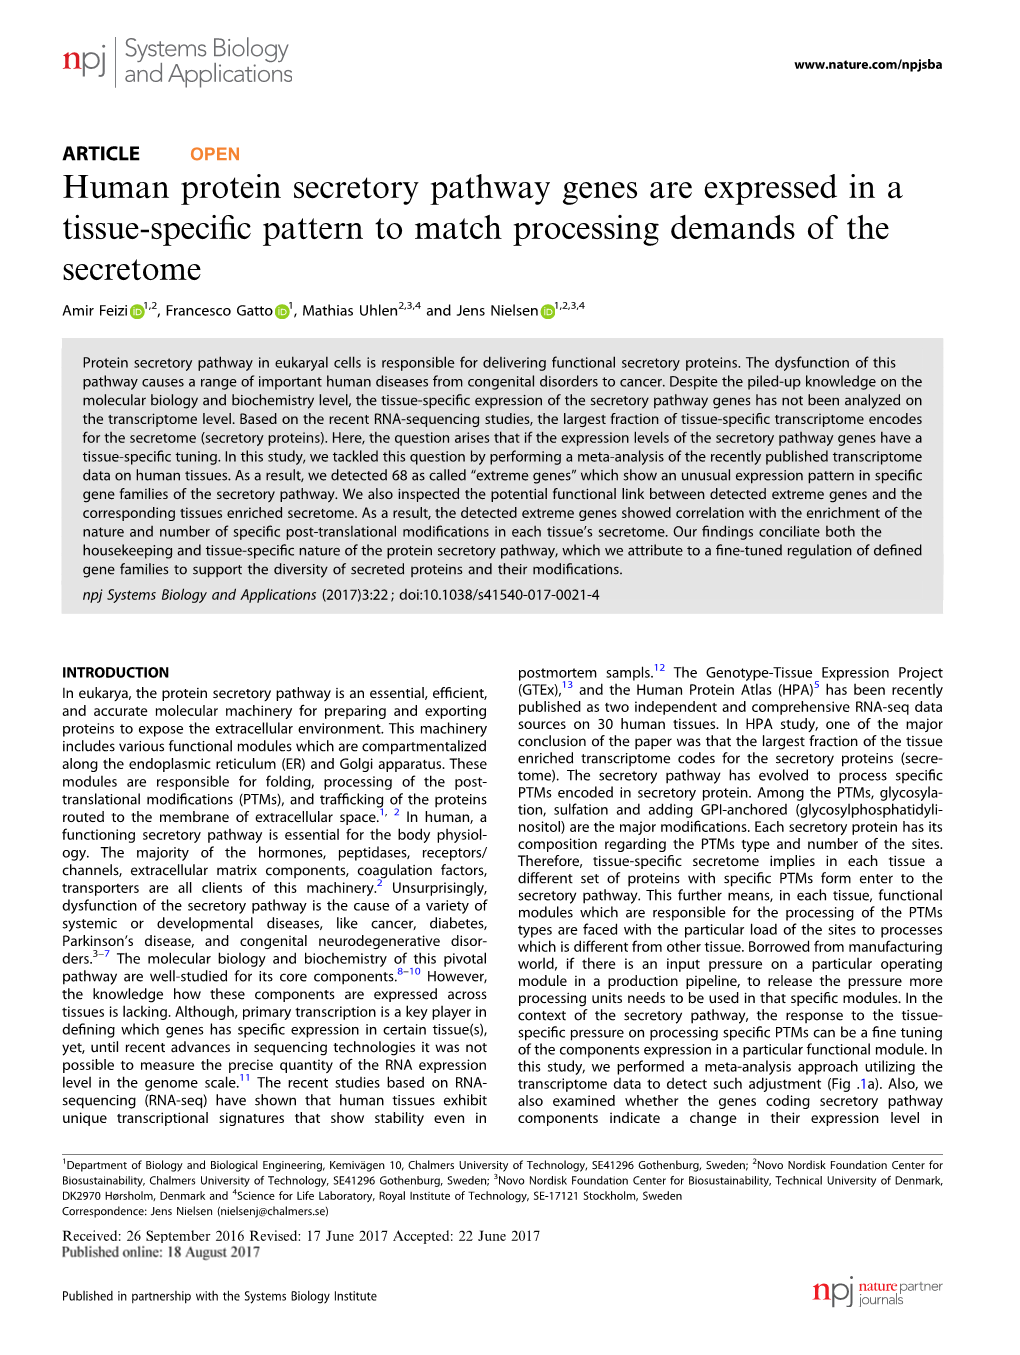 Human Protein Secretory Pathway Genes Are Expressed in a Tissue-Specific Pattern to Match Processing Demands of the Secretome